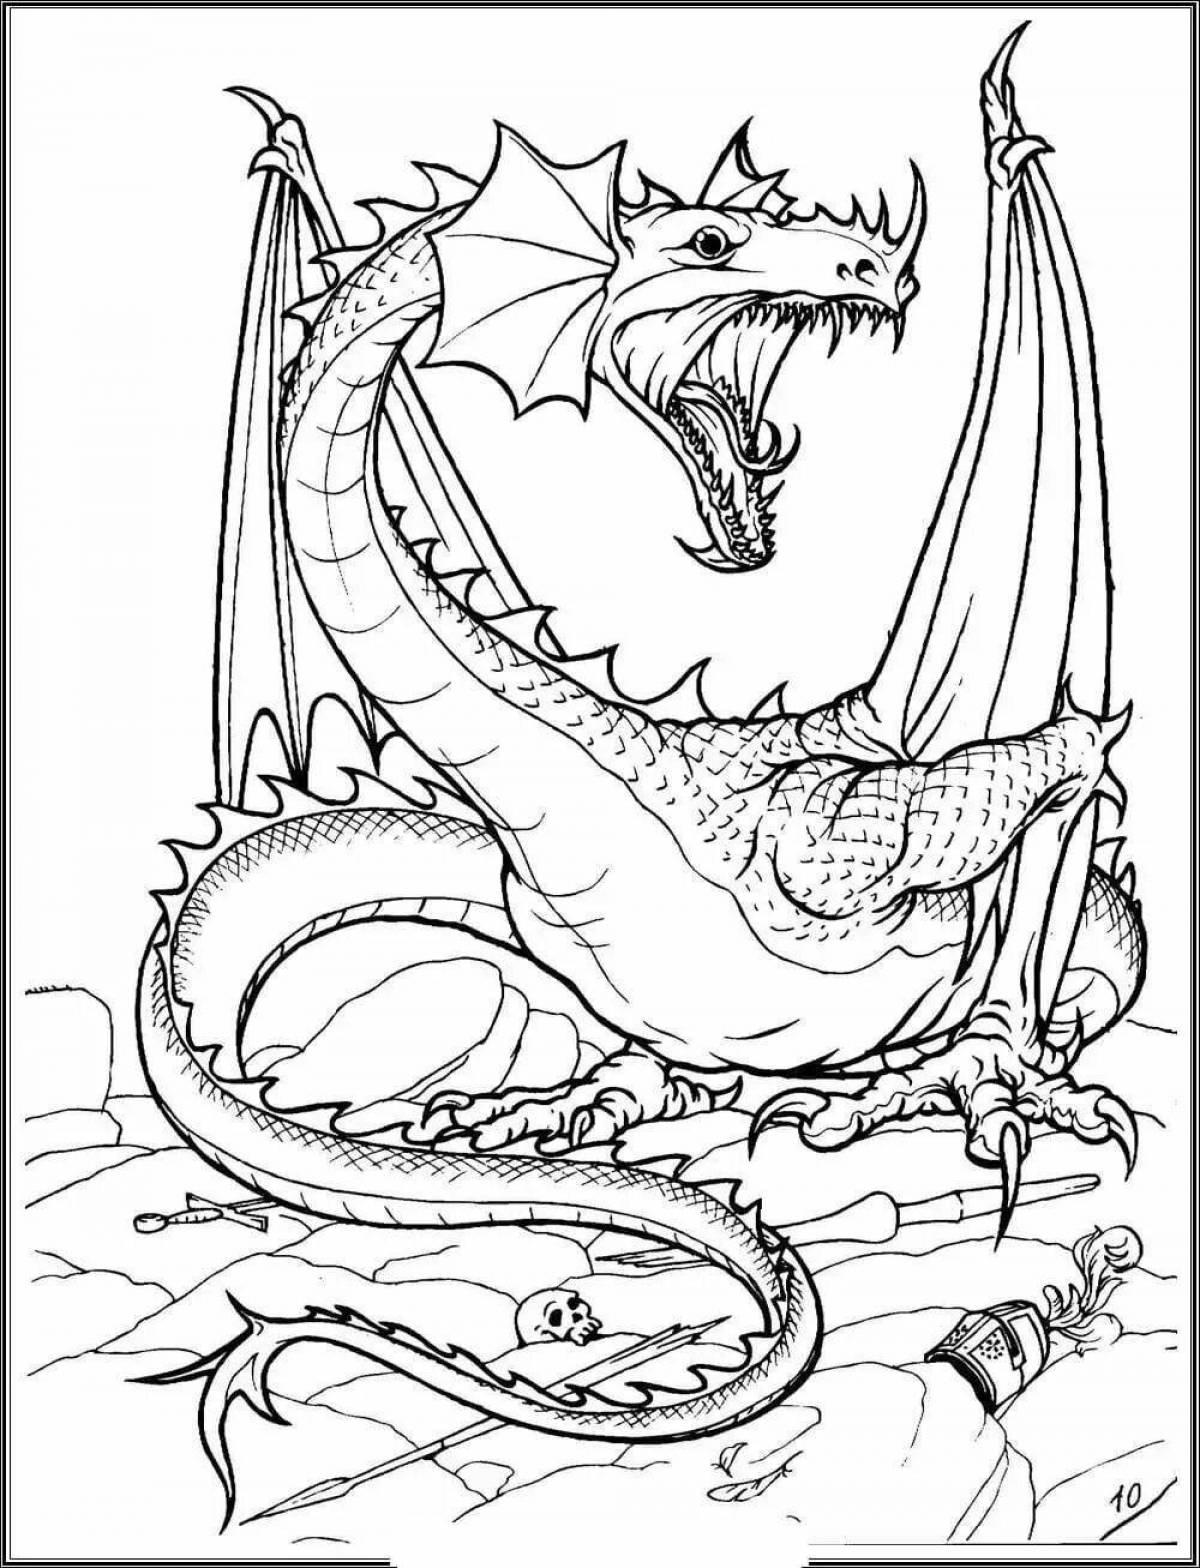 Coloring dragon for children